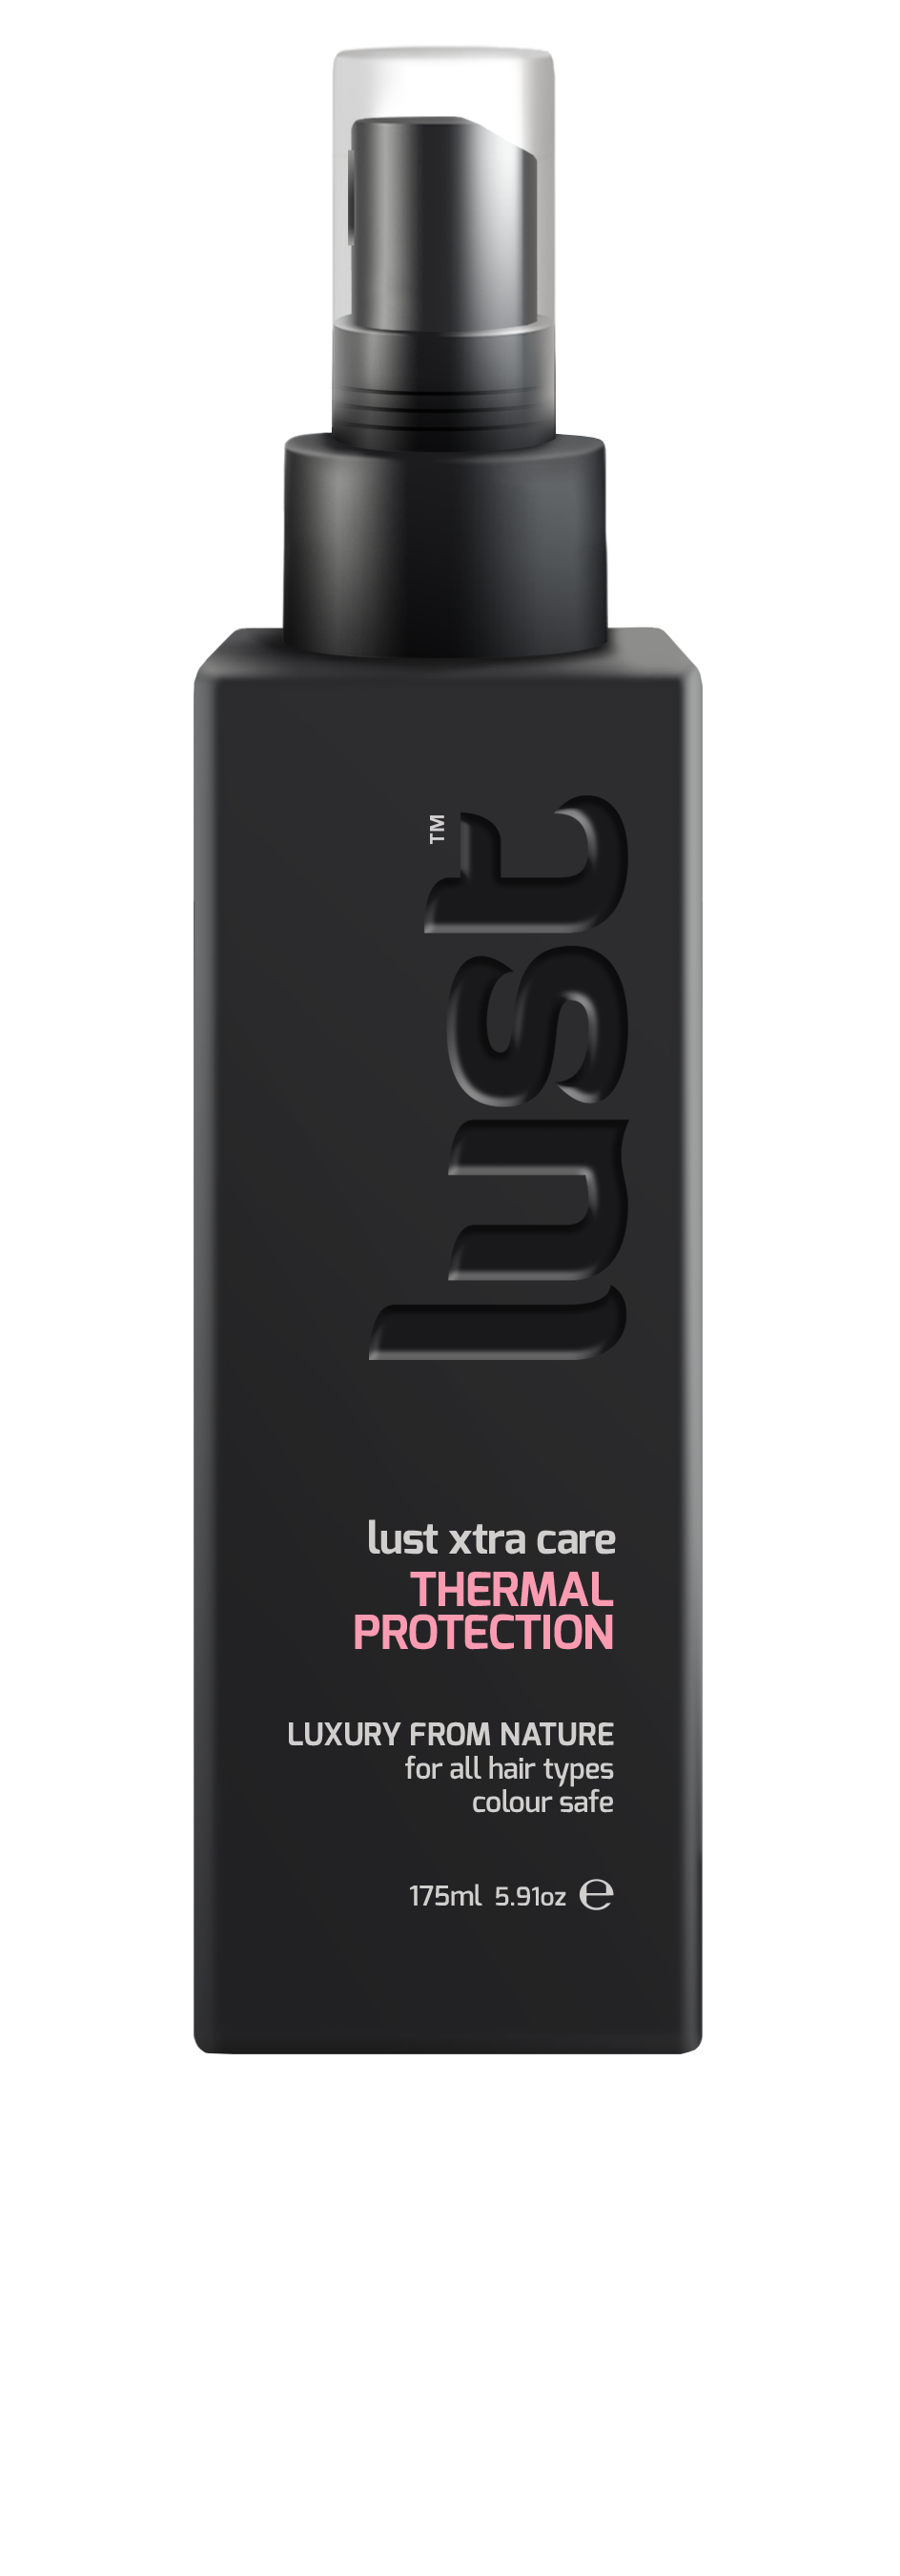 Lust Xtra Care Thermal Protection 175mls